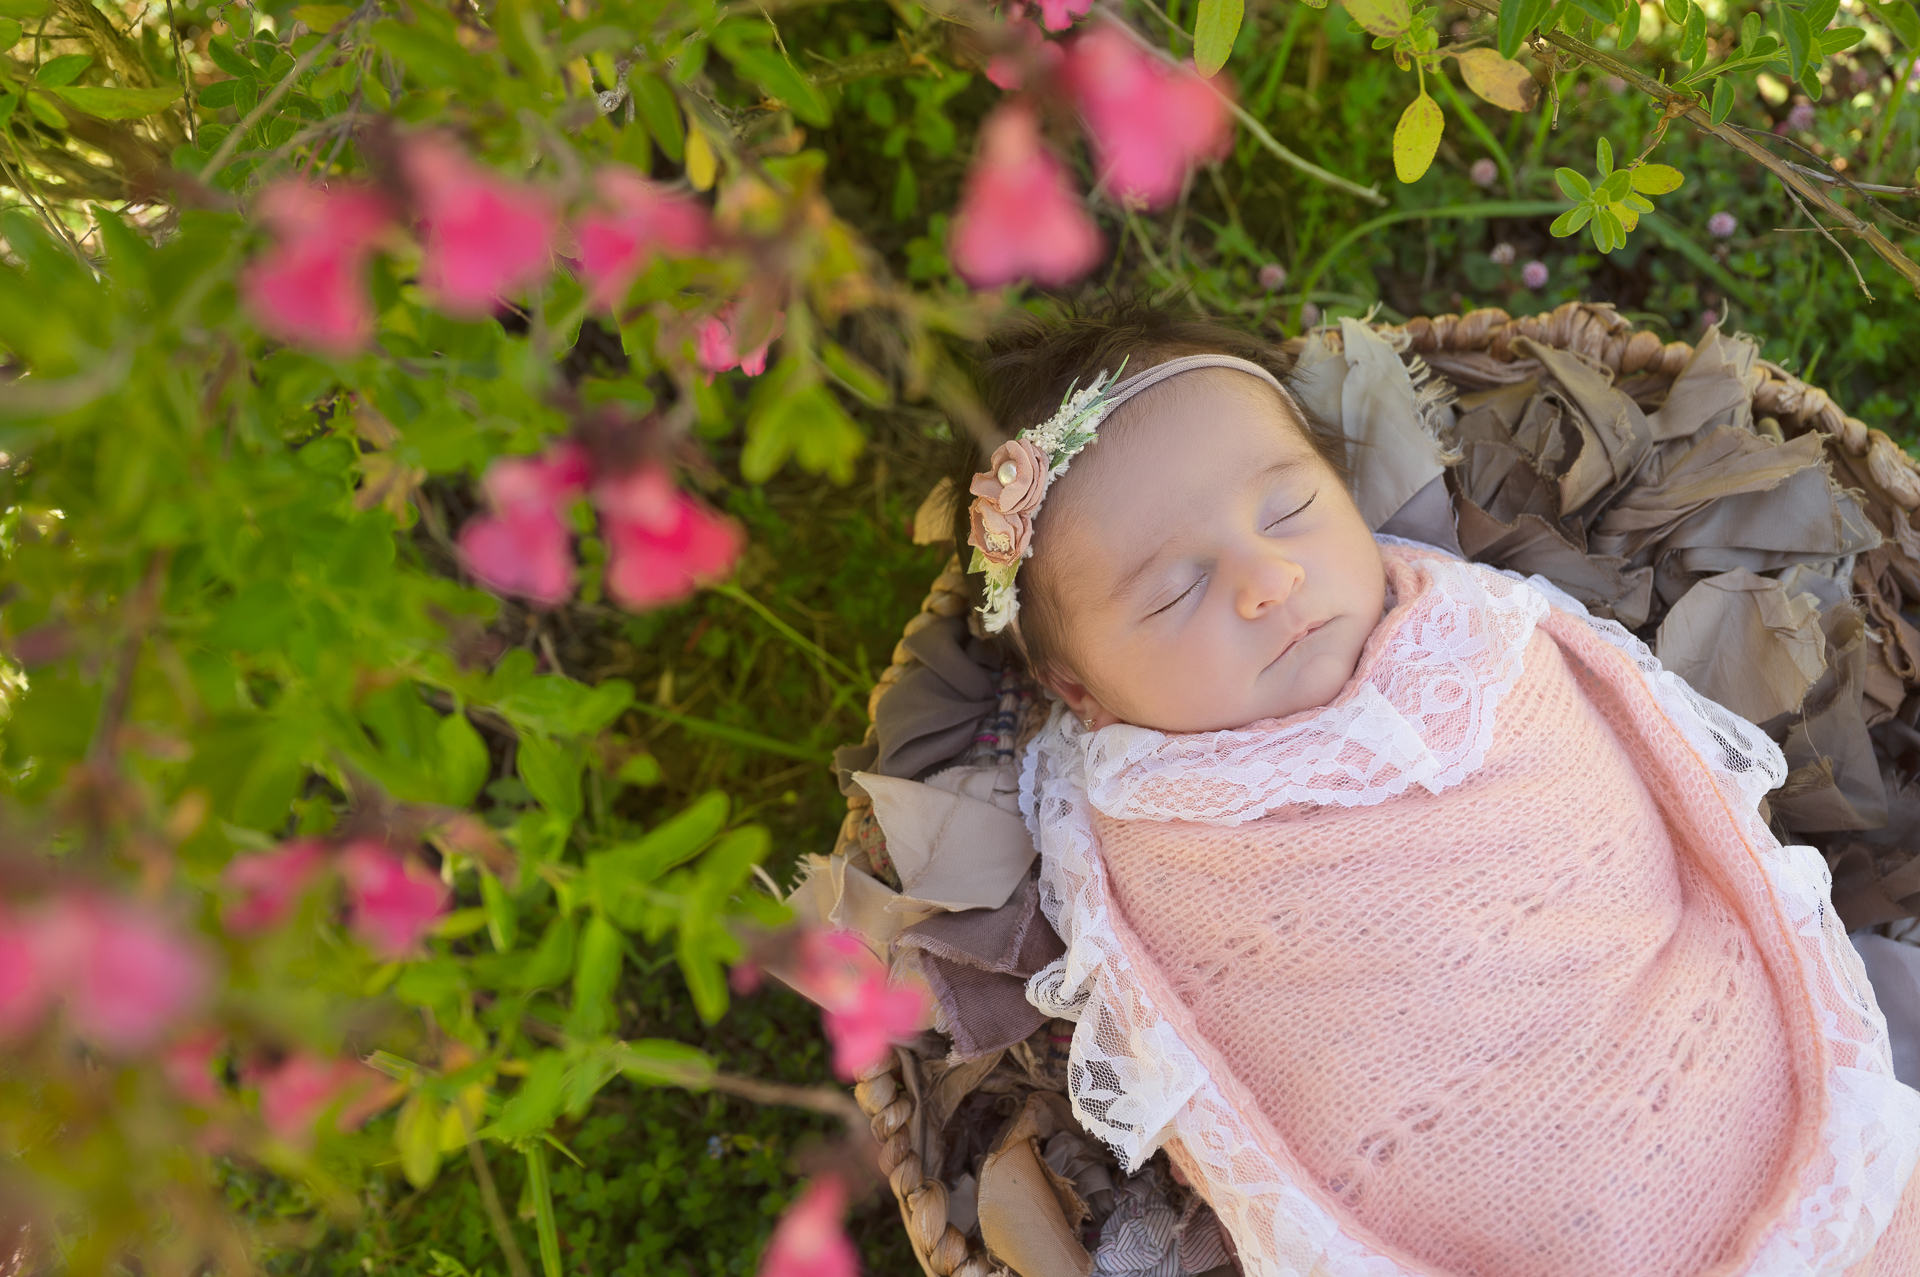 Newborn girl rests outdoors wearing pink wrap and pink and green headband. Pink flowers and grass decorating the scene.